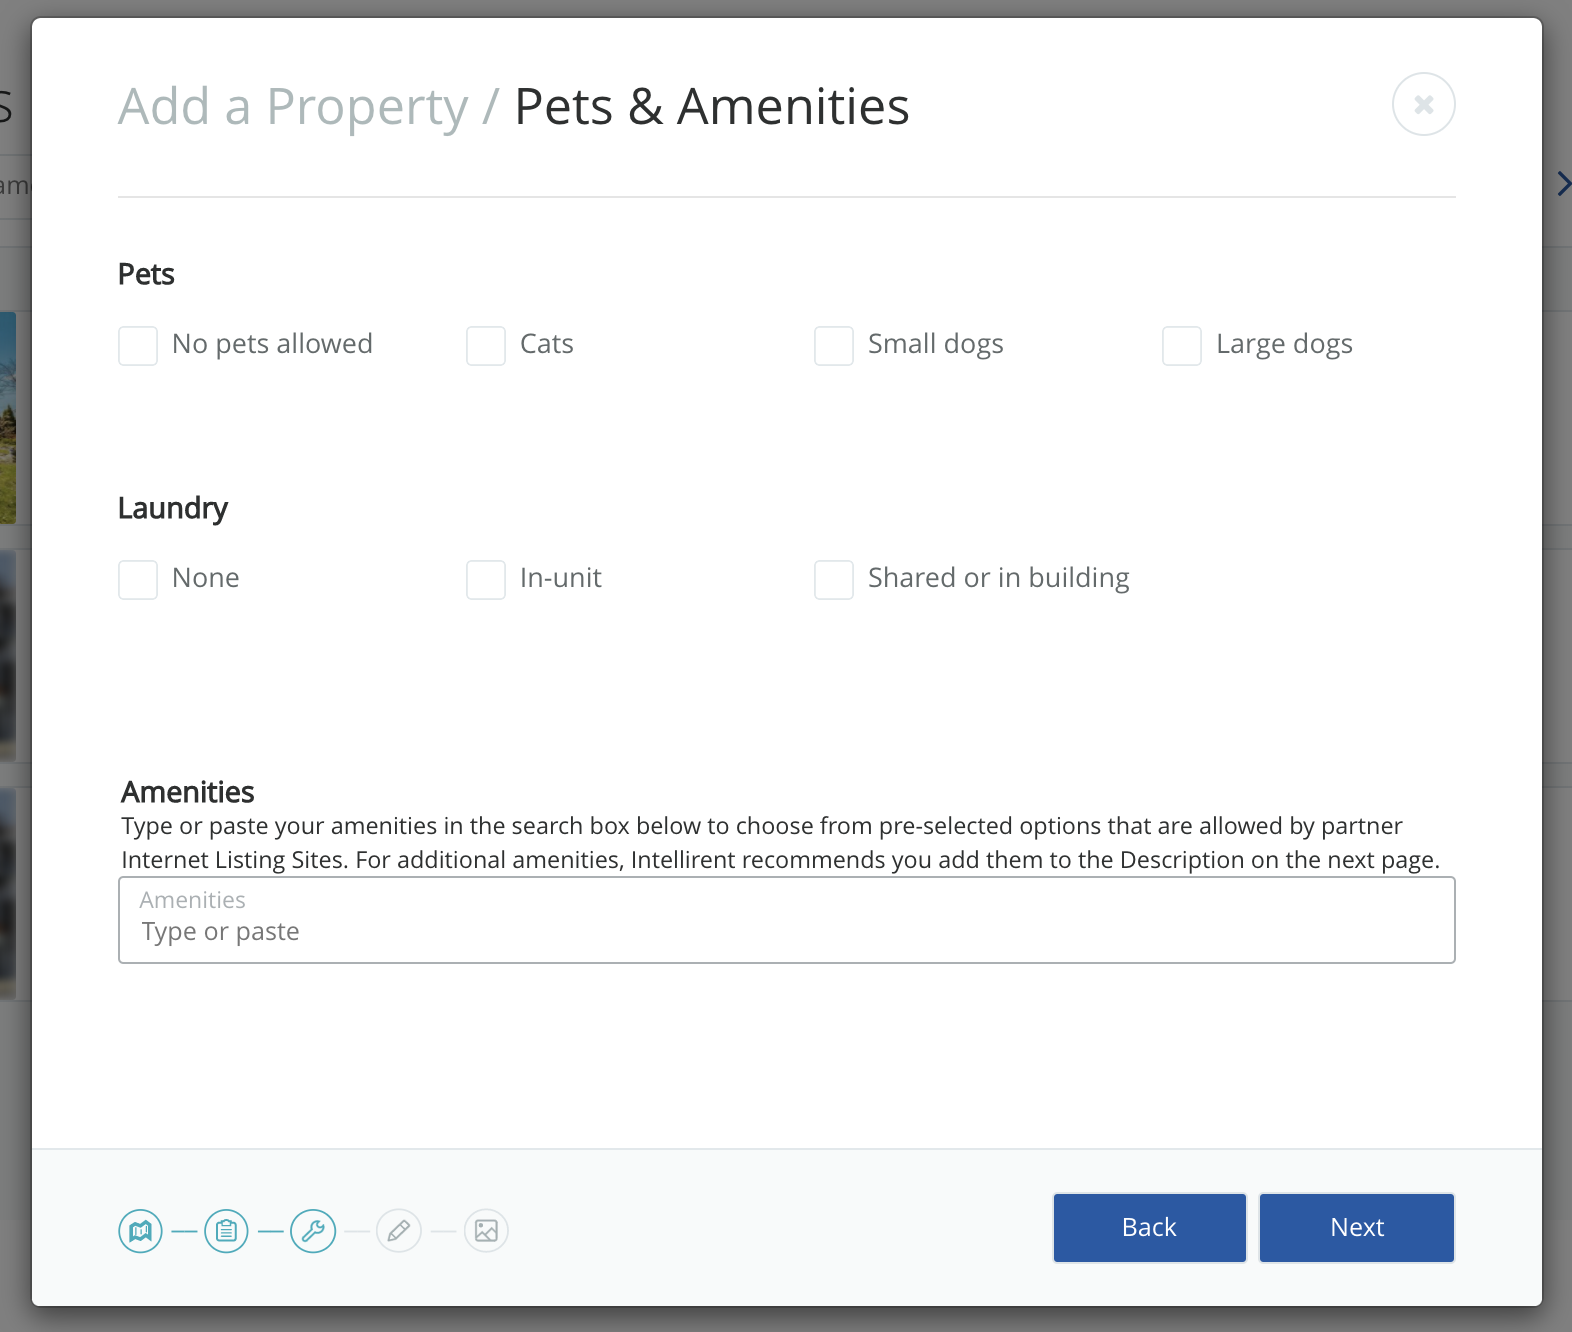 Add_a_Property_Pets_Amenities.png